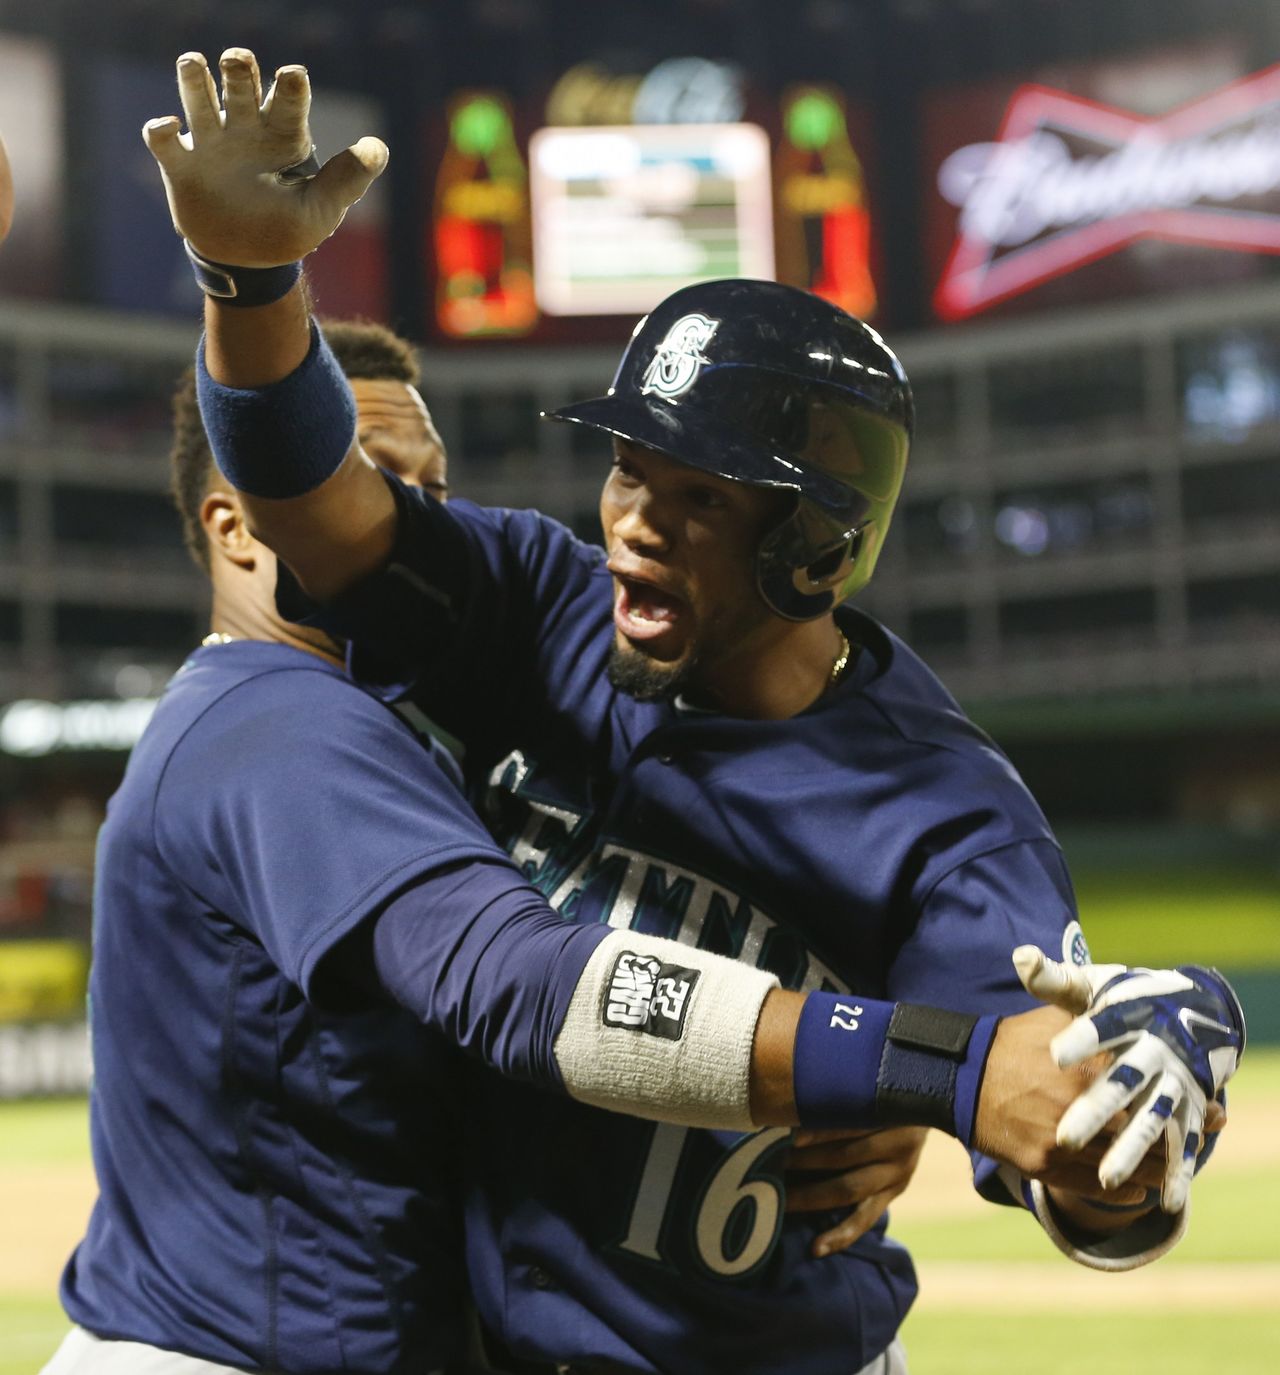 The Mariners’ Luis Sardinas (16) celebrates his two-run home run with Robinson Cano against the Rangers on Tuesday in Arlington, Texas.